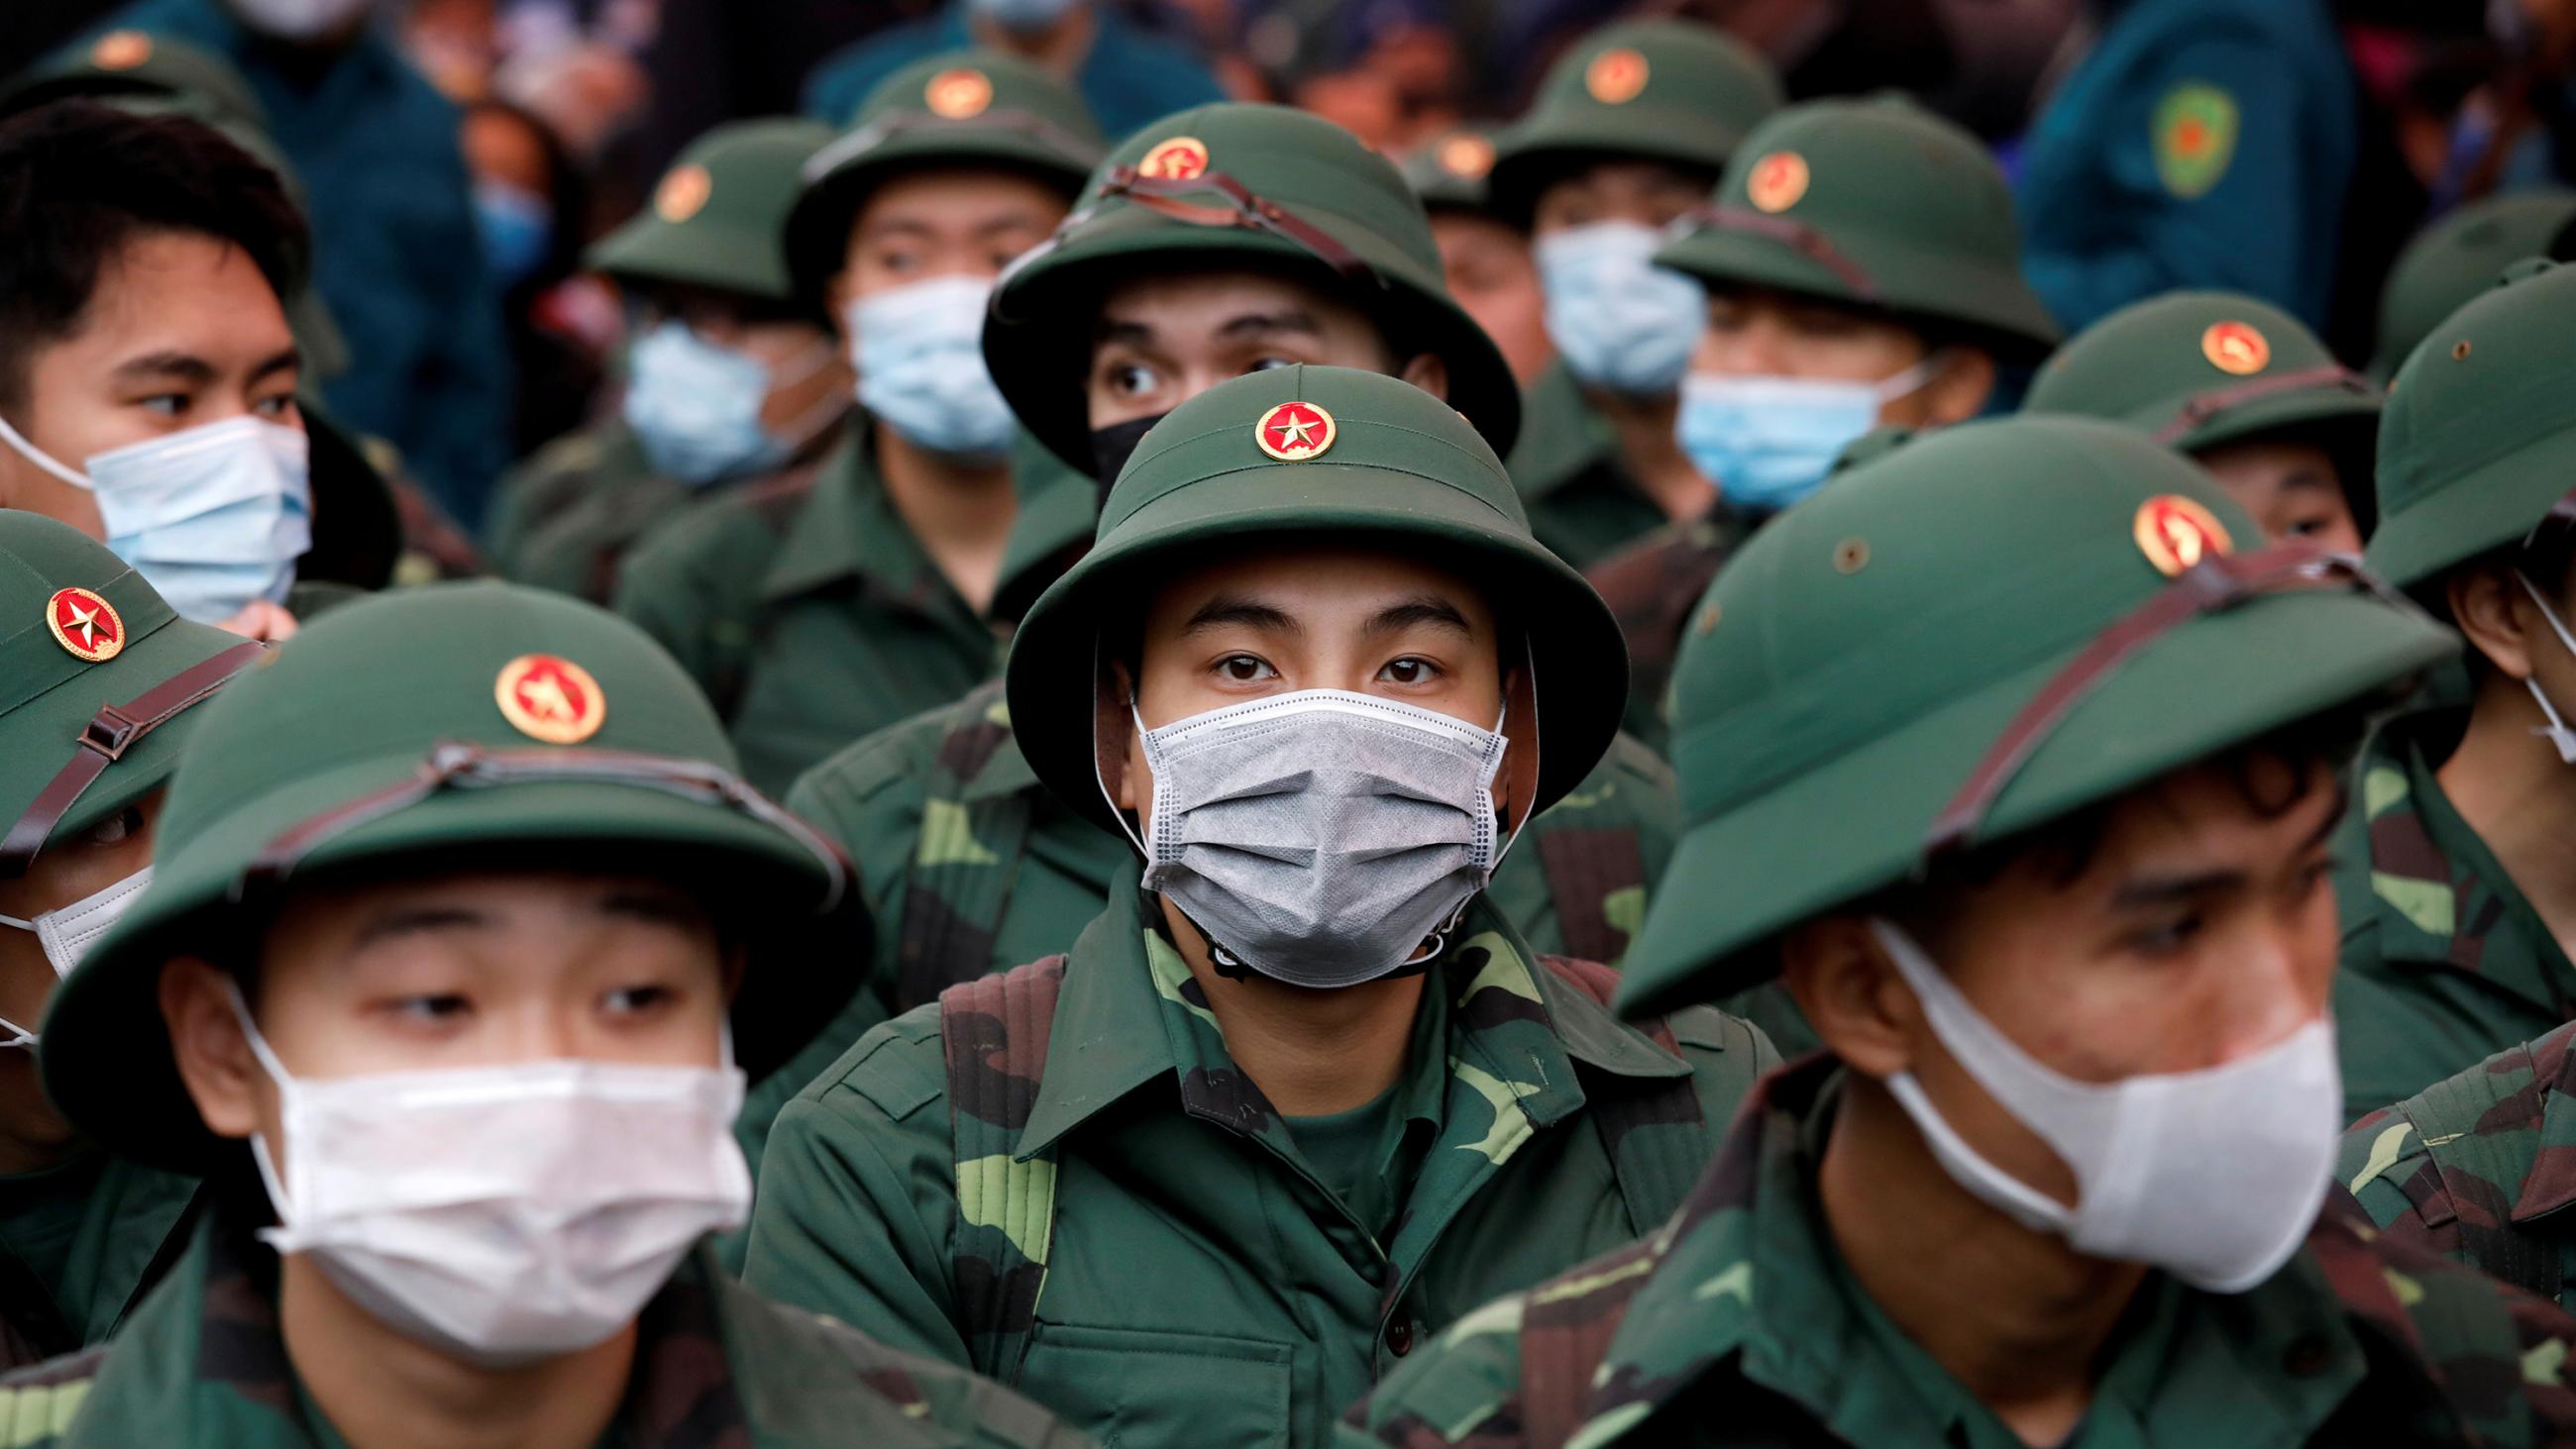 The photo shows a crowd of soldiers in their green dress uniforms all wearing masks. 